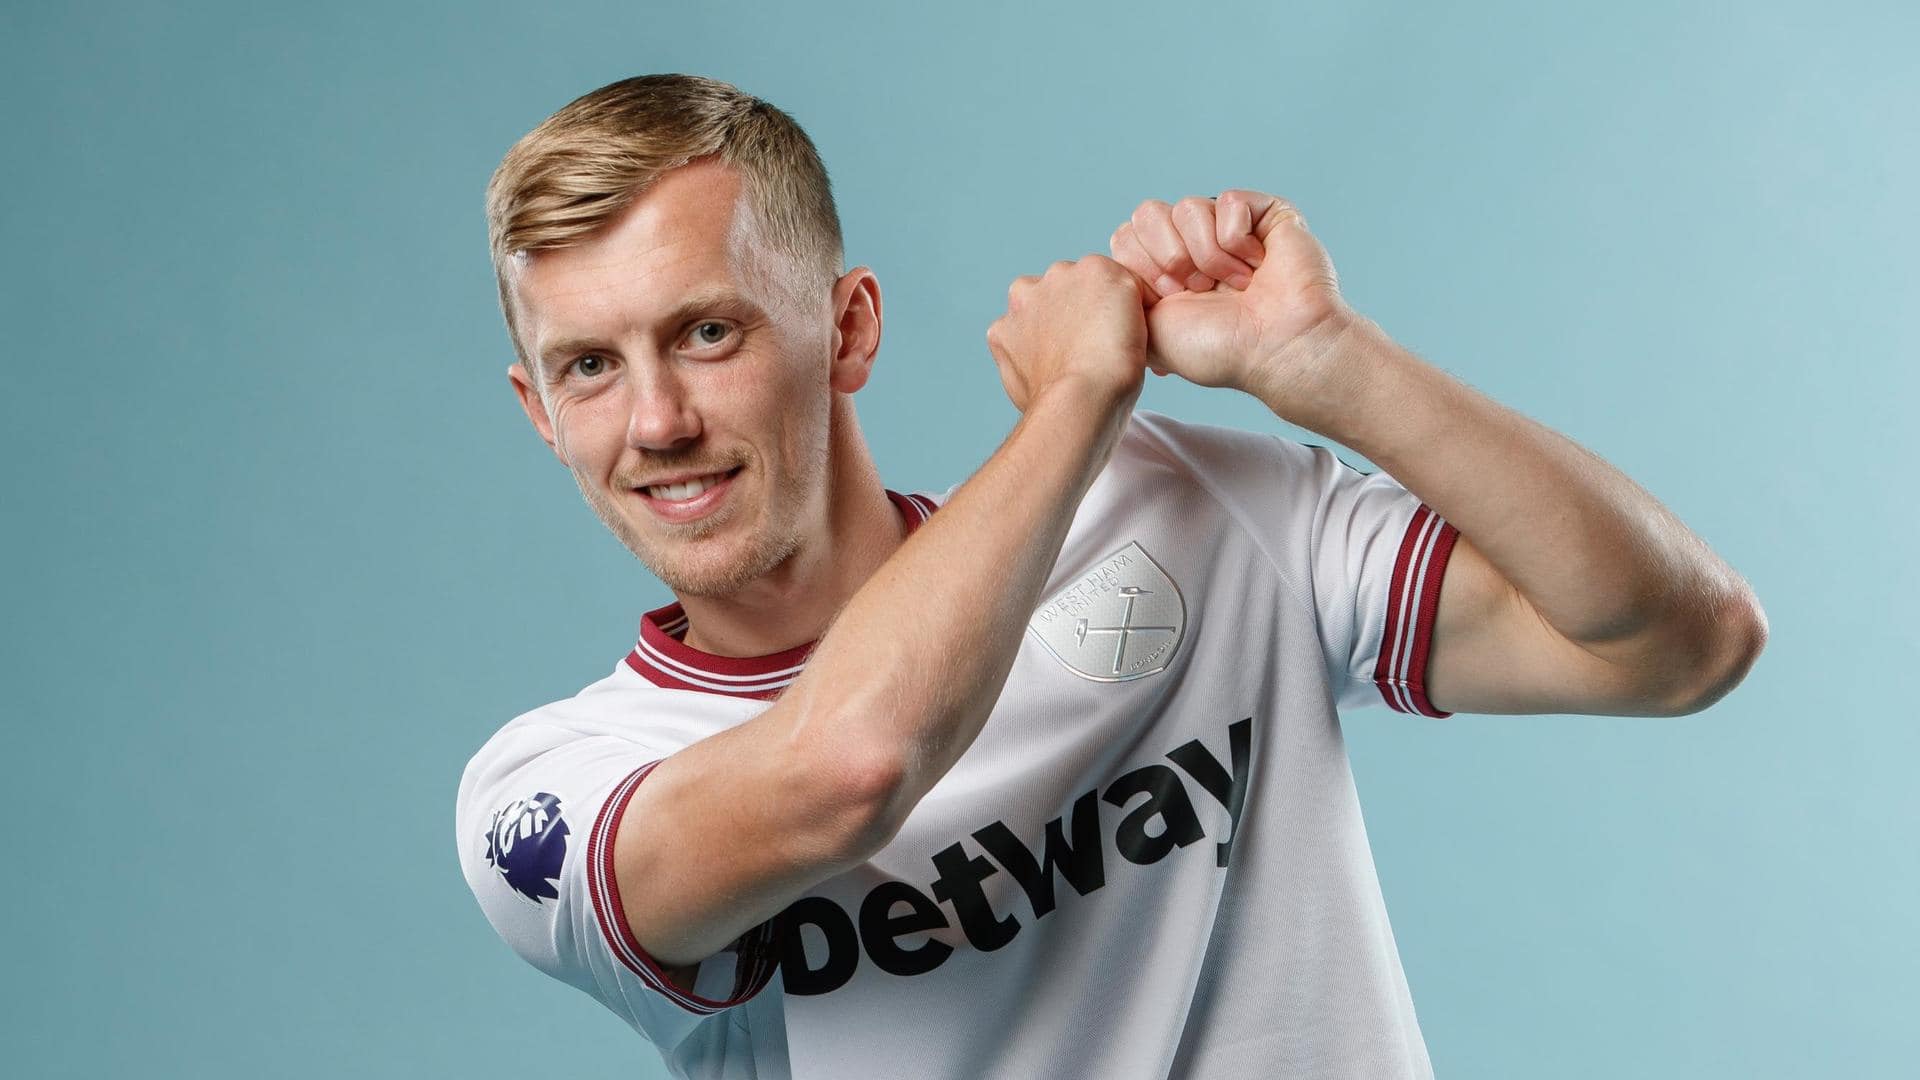 West Ham sign James Ward-Prowse for £30m: Decoding his stats